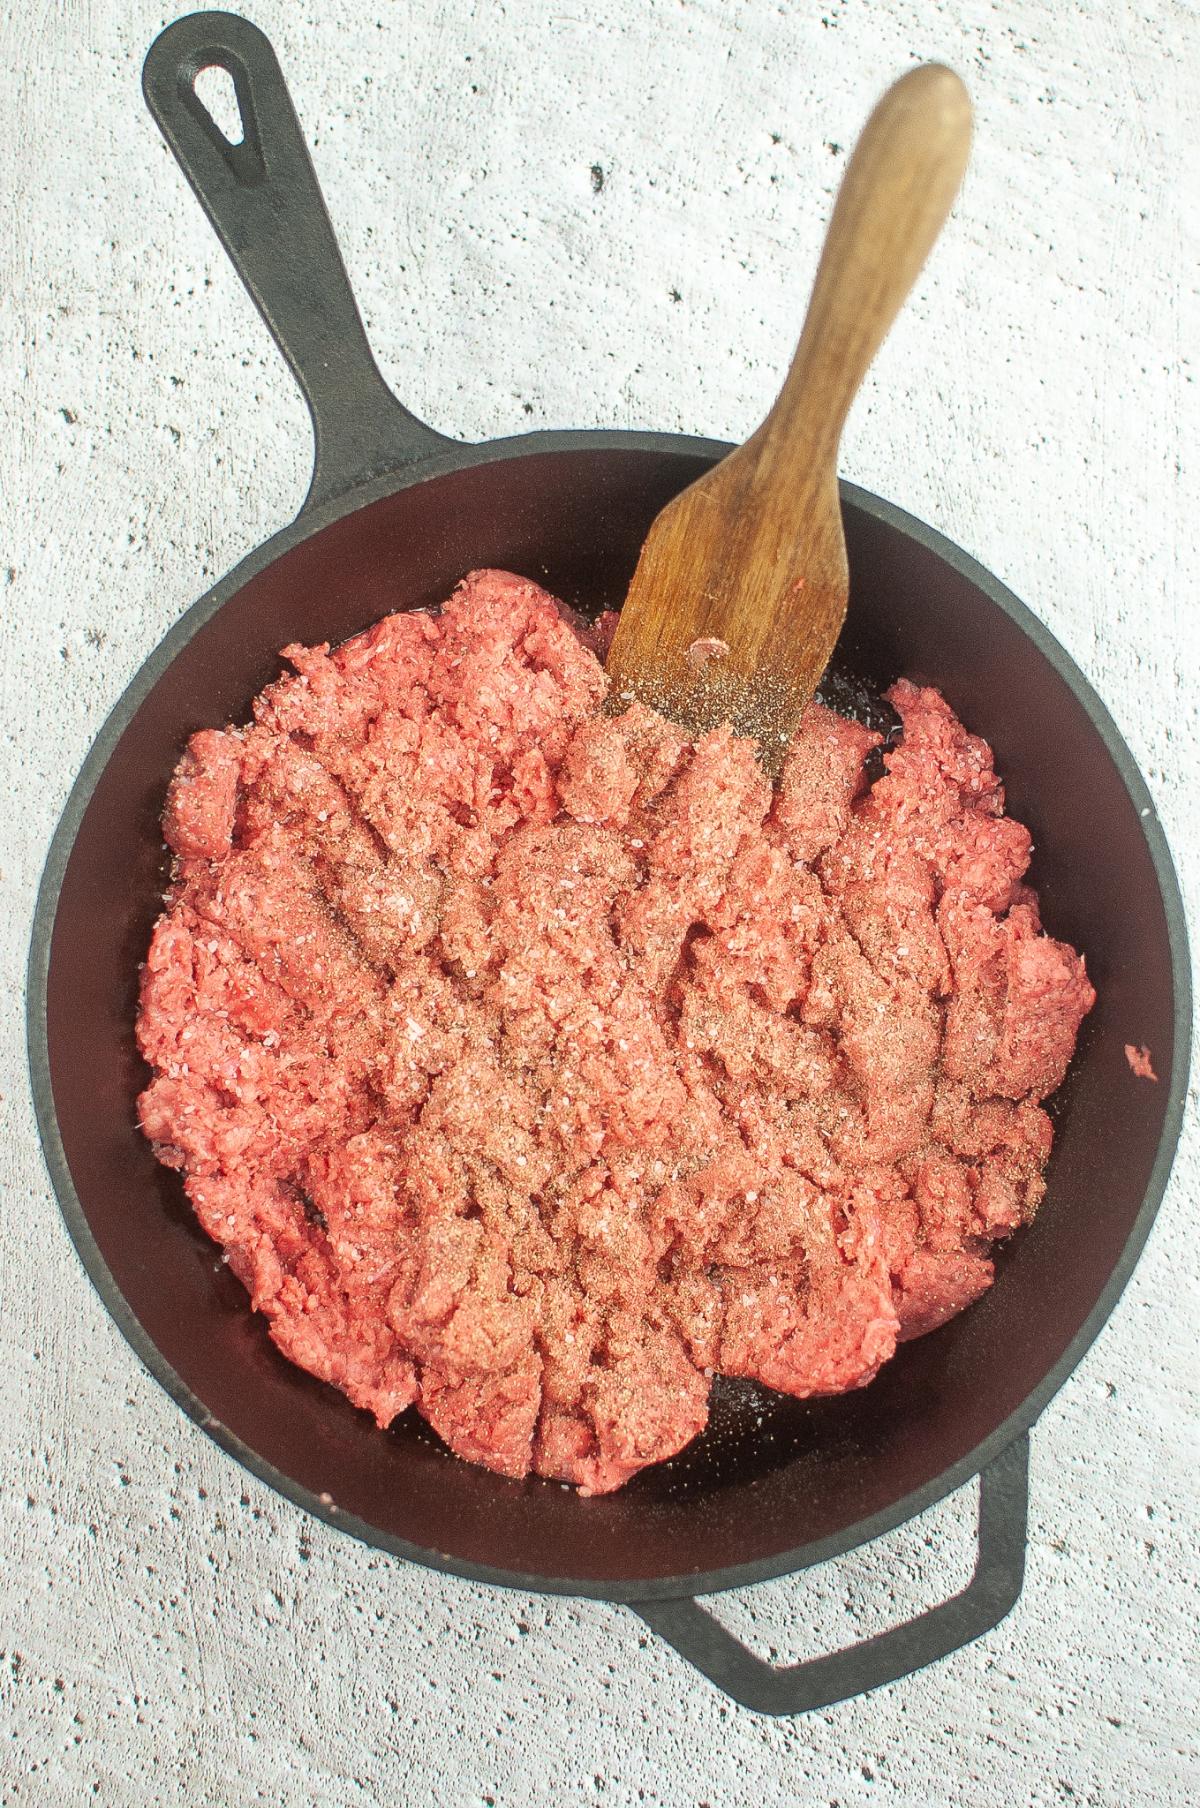 Salt and pepper are added to the ground beef.